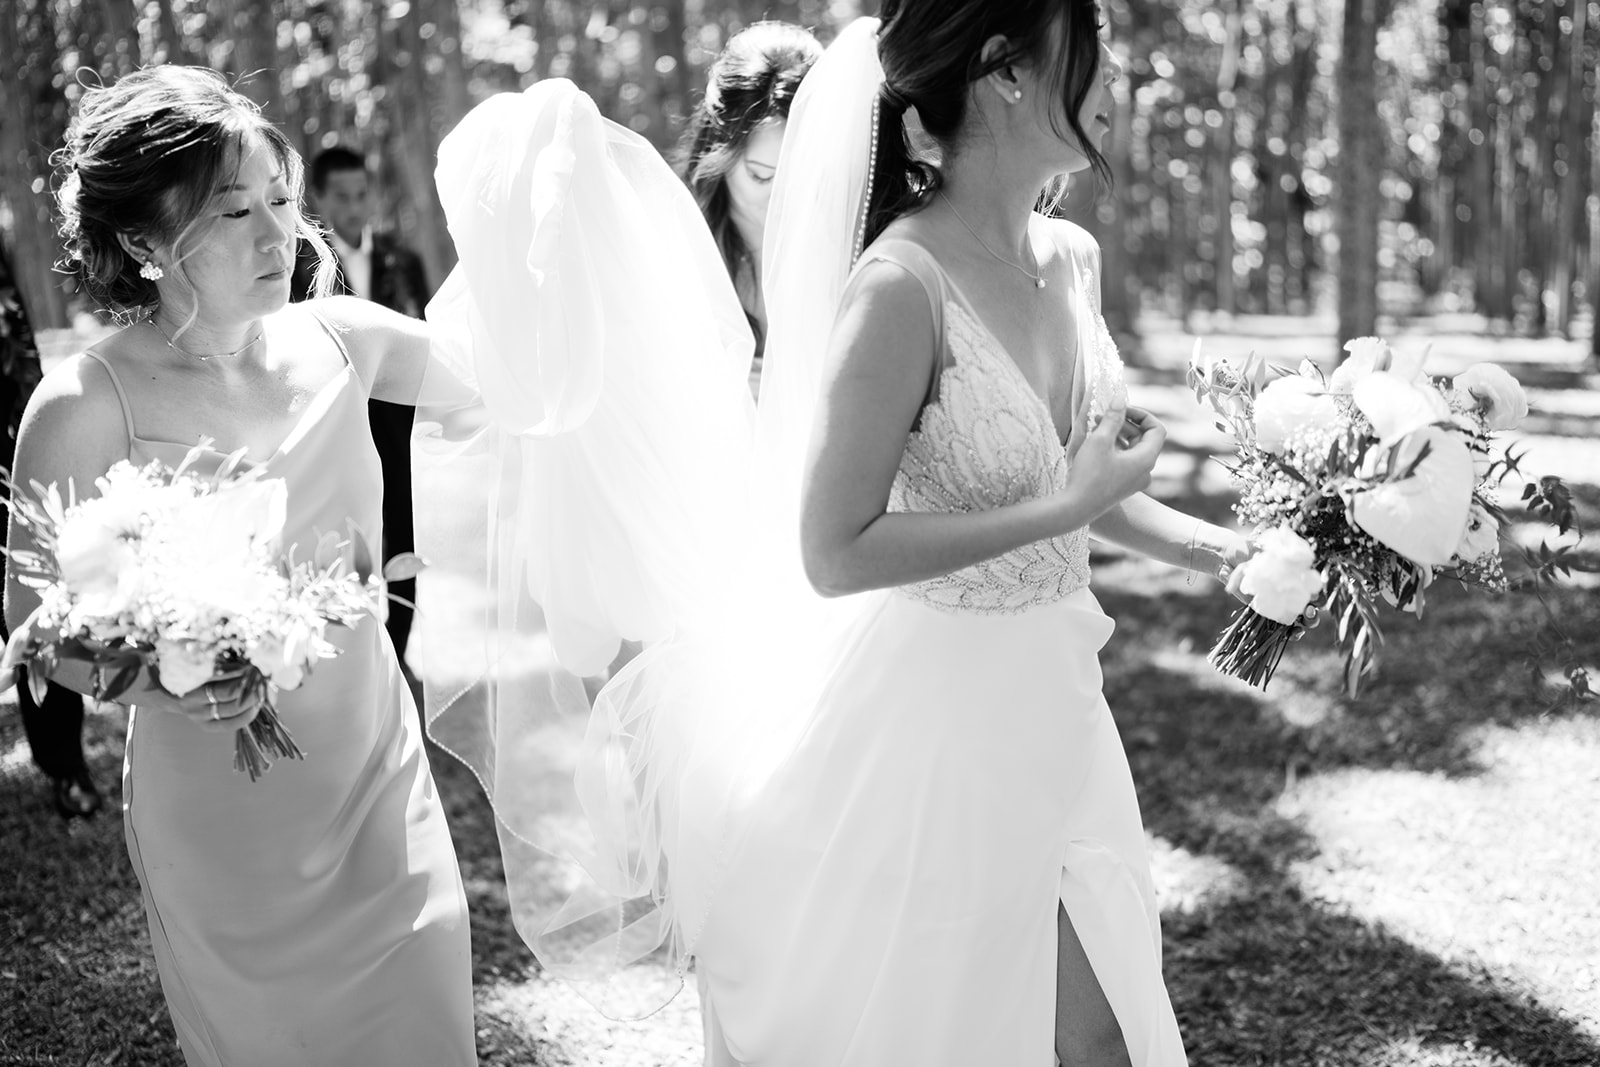 Bride with her veil caught by a gust of wind, accompanied by two bridesmaids holding bouquets, in a sunlit forest.